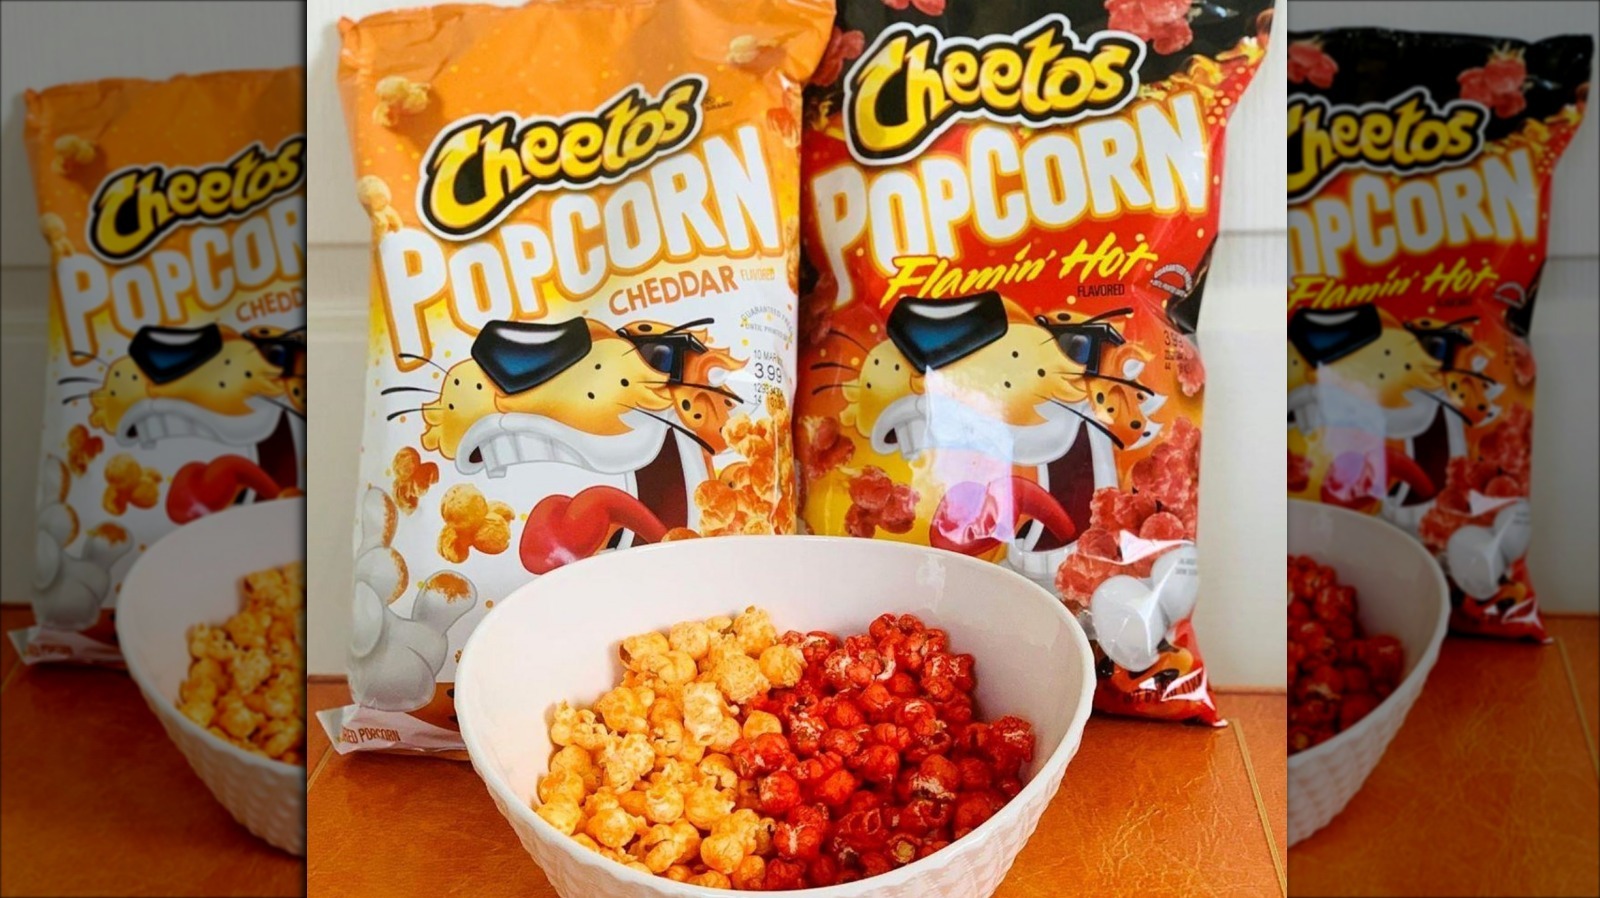 Cheetos Just Upgraded Your Old-School Holiday Popcorn Tin